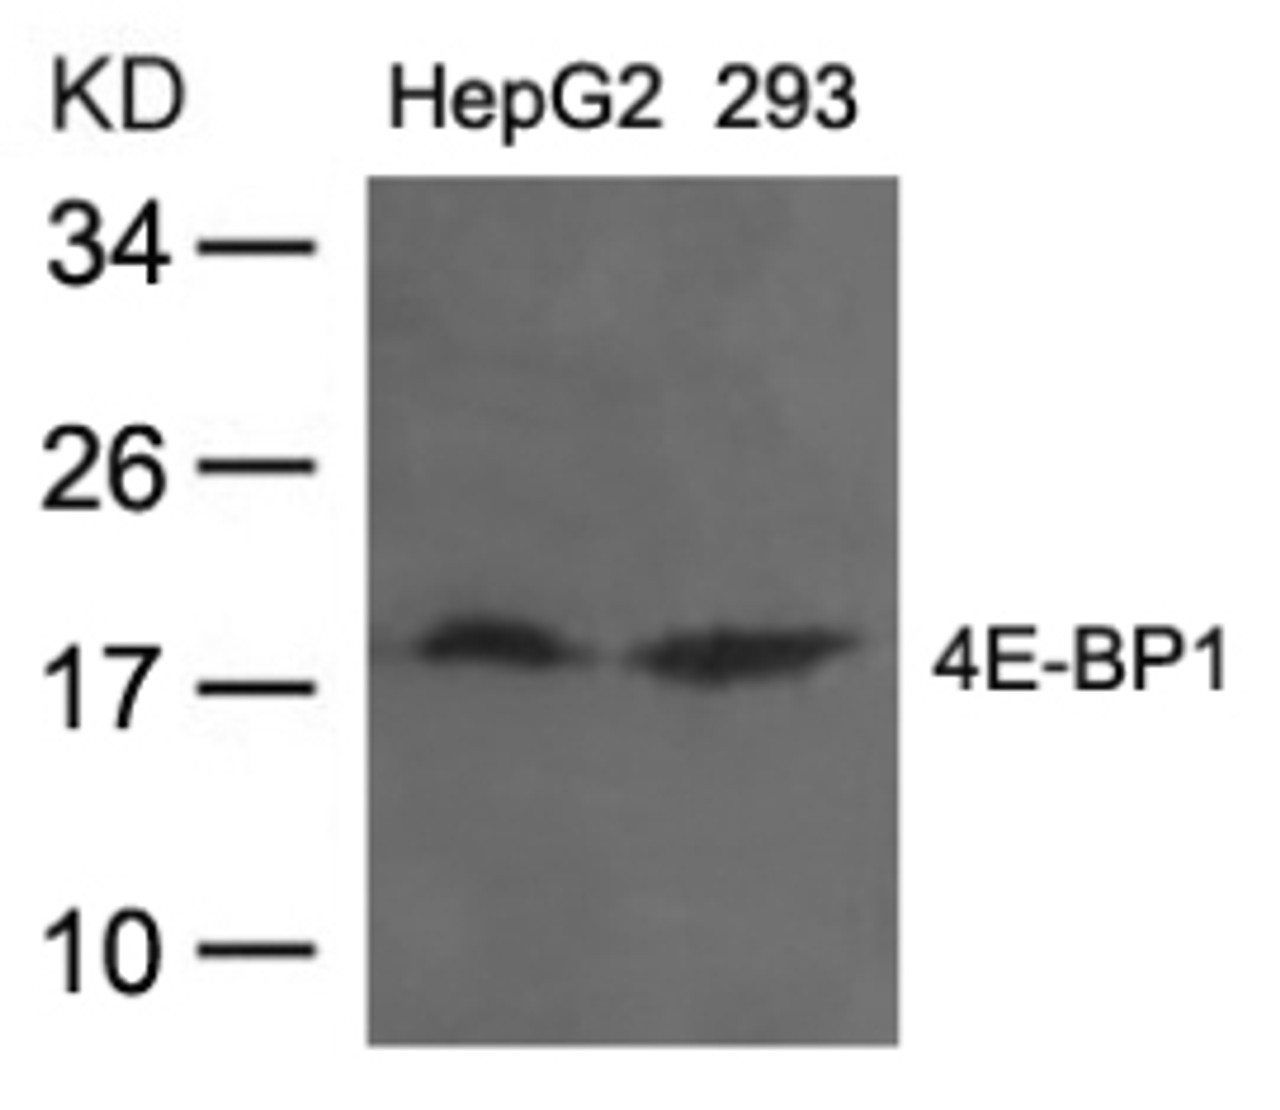 Western blot analysis of lysed extracts from HepG2 and 293 cells using 4E-BP1 (Ab-36) .